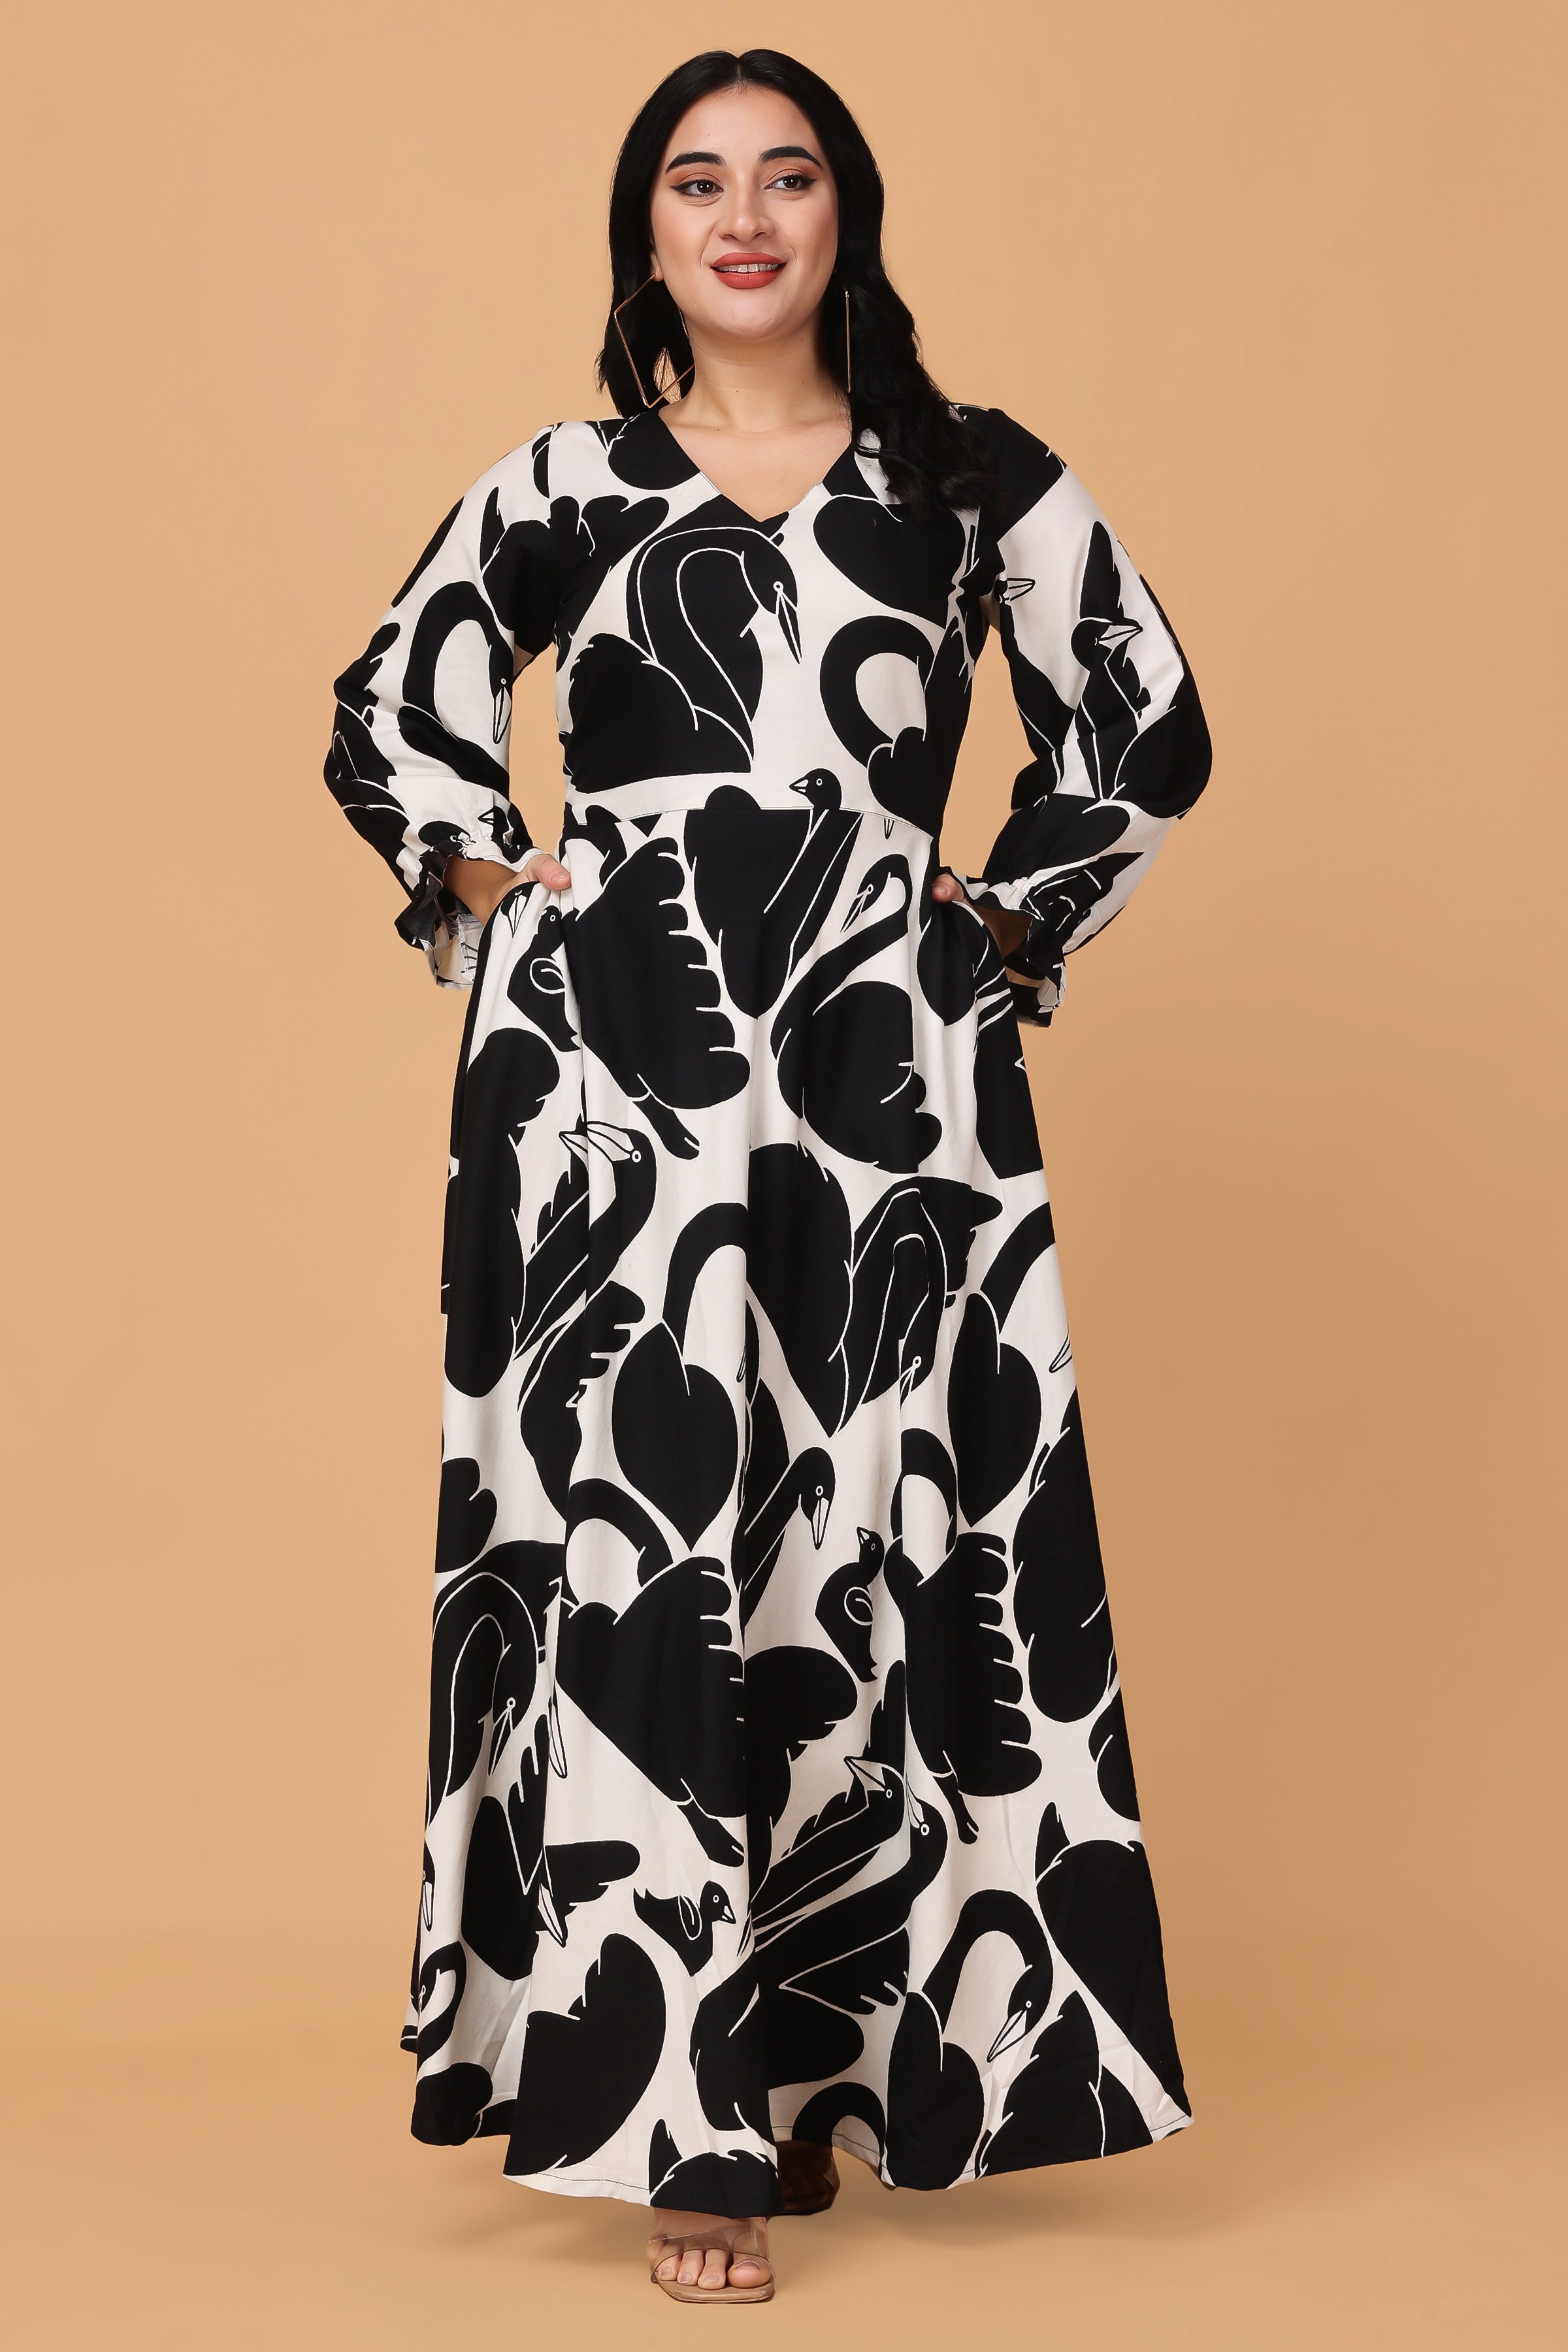 Long Sleeve Maxi Dresses - Buy Long Sleeve Maxi Dresses online in India